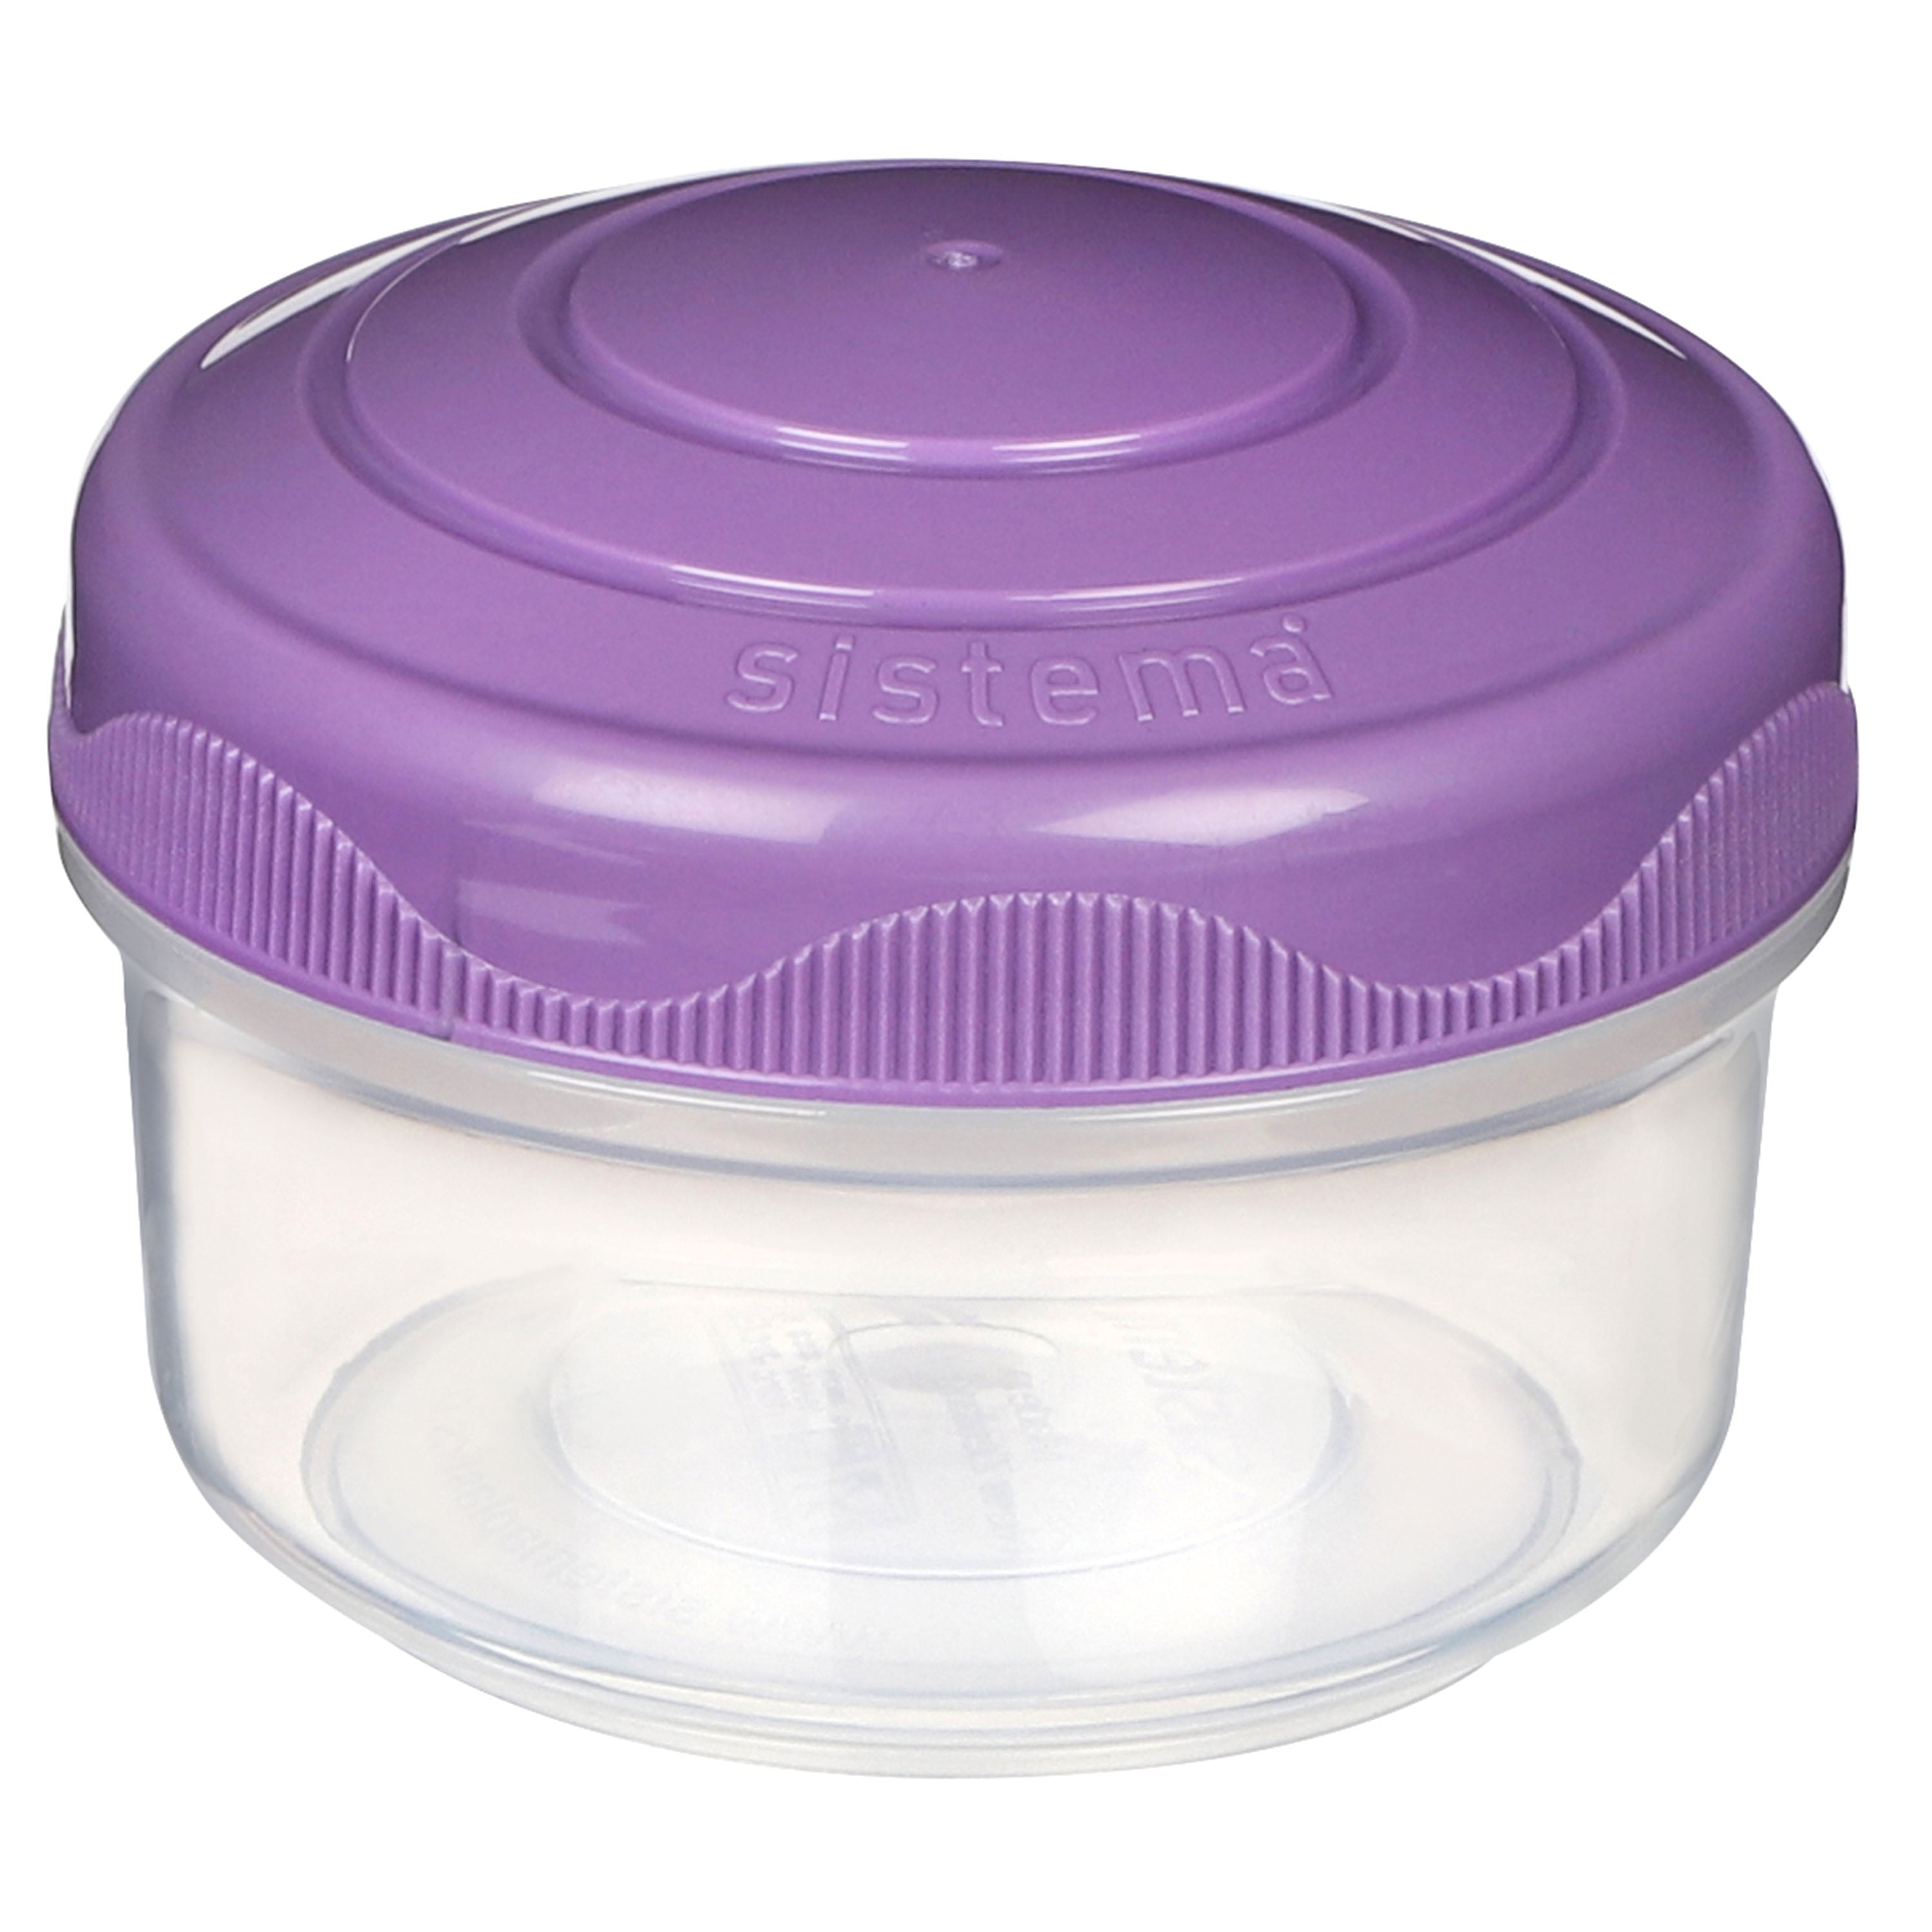 3 x Sistema To Go Mini Bites Snack Pots, Dips, Food Containers 130